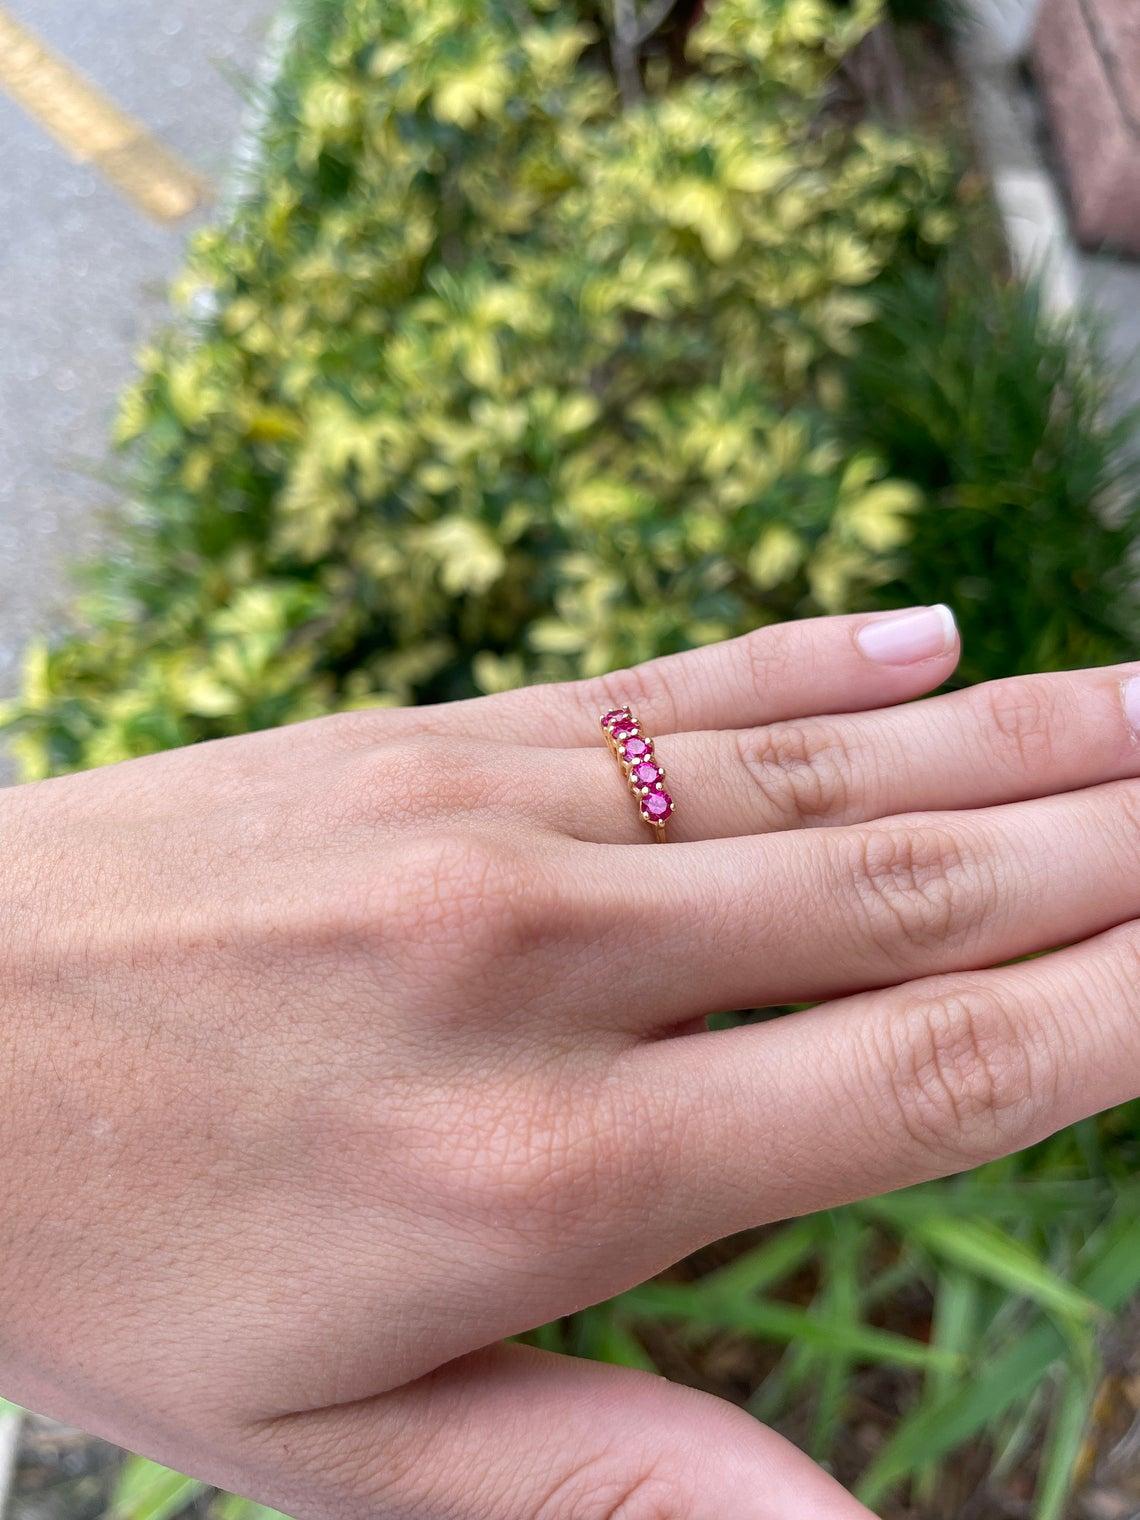 AAA+ High Fashion Rubellite Stacking Ring Band In New Condition For Sale In Jupiter, FL